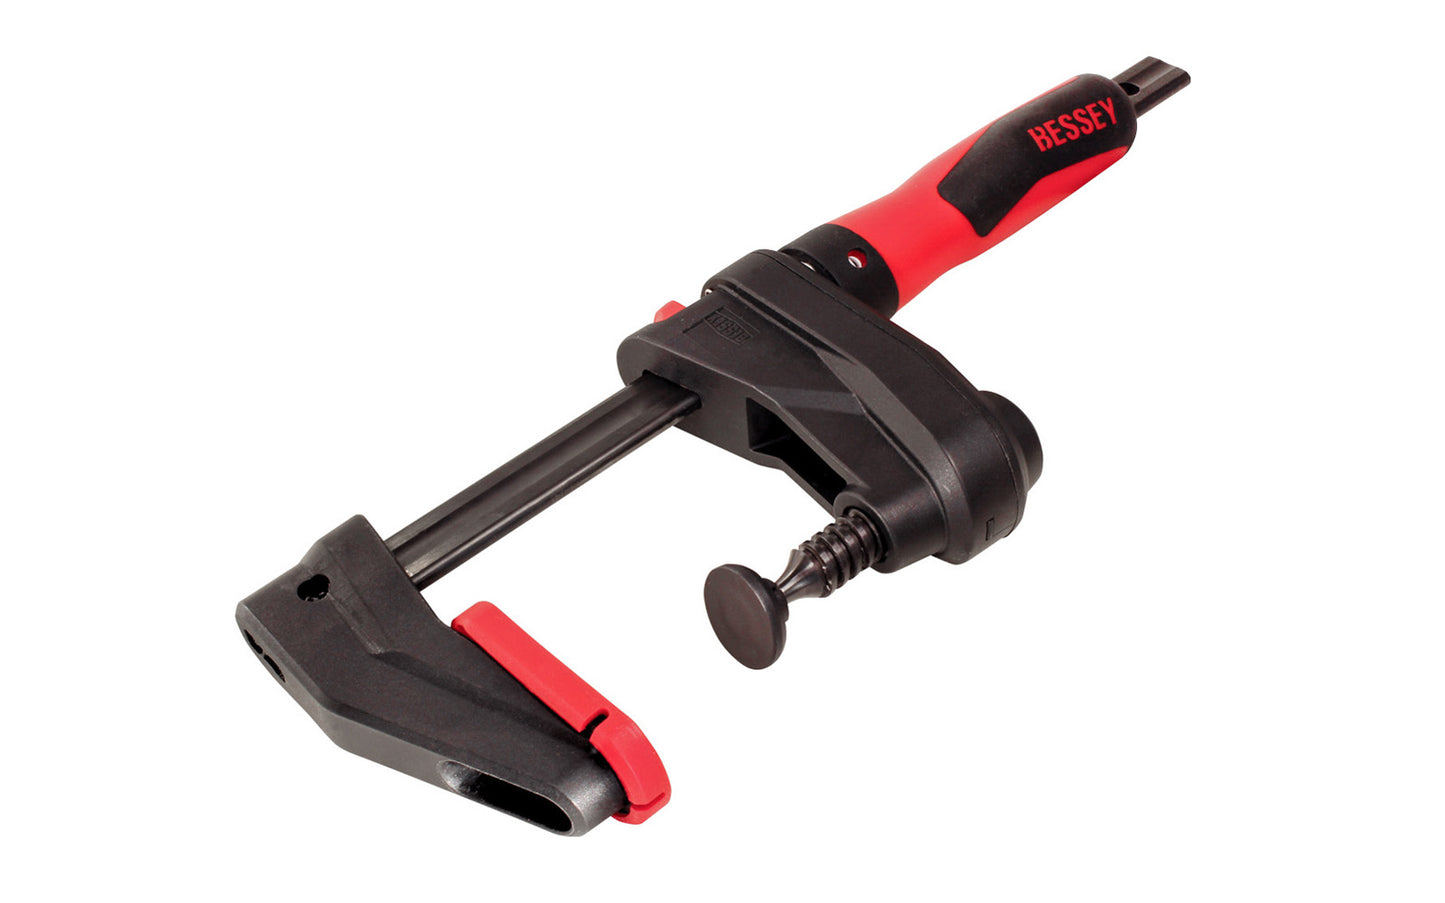 Bessey GearKlamp - 6" Opening Capacity ~ GK15 creates the possibility of reaching "into” confined spaces to achieve clamping solutions. Fast action, secure clamping force up to 450 lbs. 6" max opening - 2-3/8" throat depth. Quick-release shift button to quickly adjust sliding bar. Model GK15. 788502204422